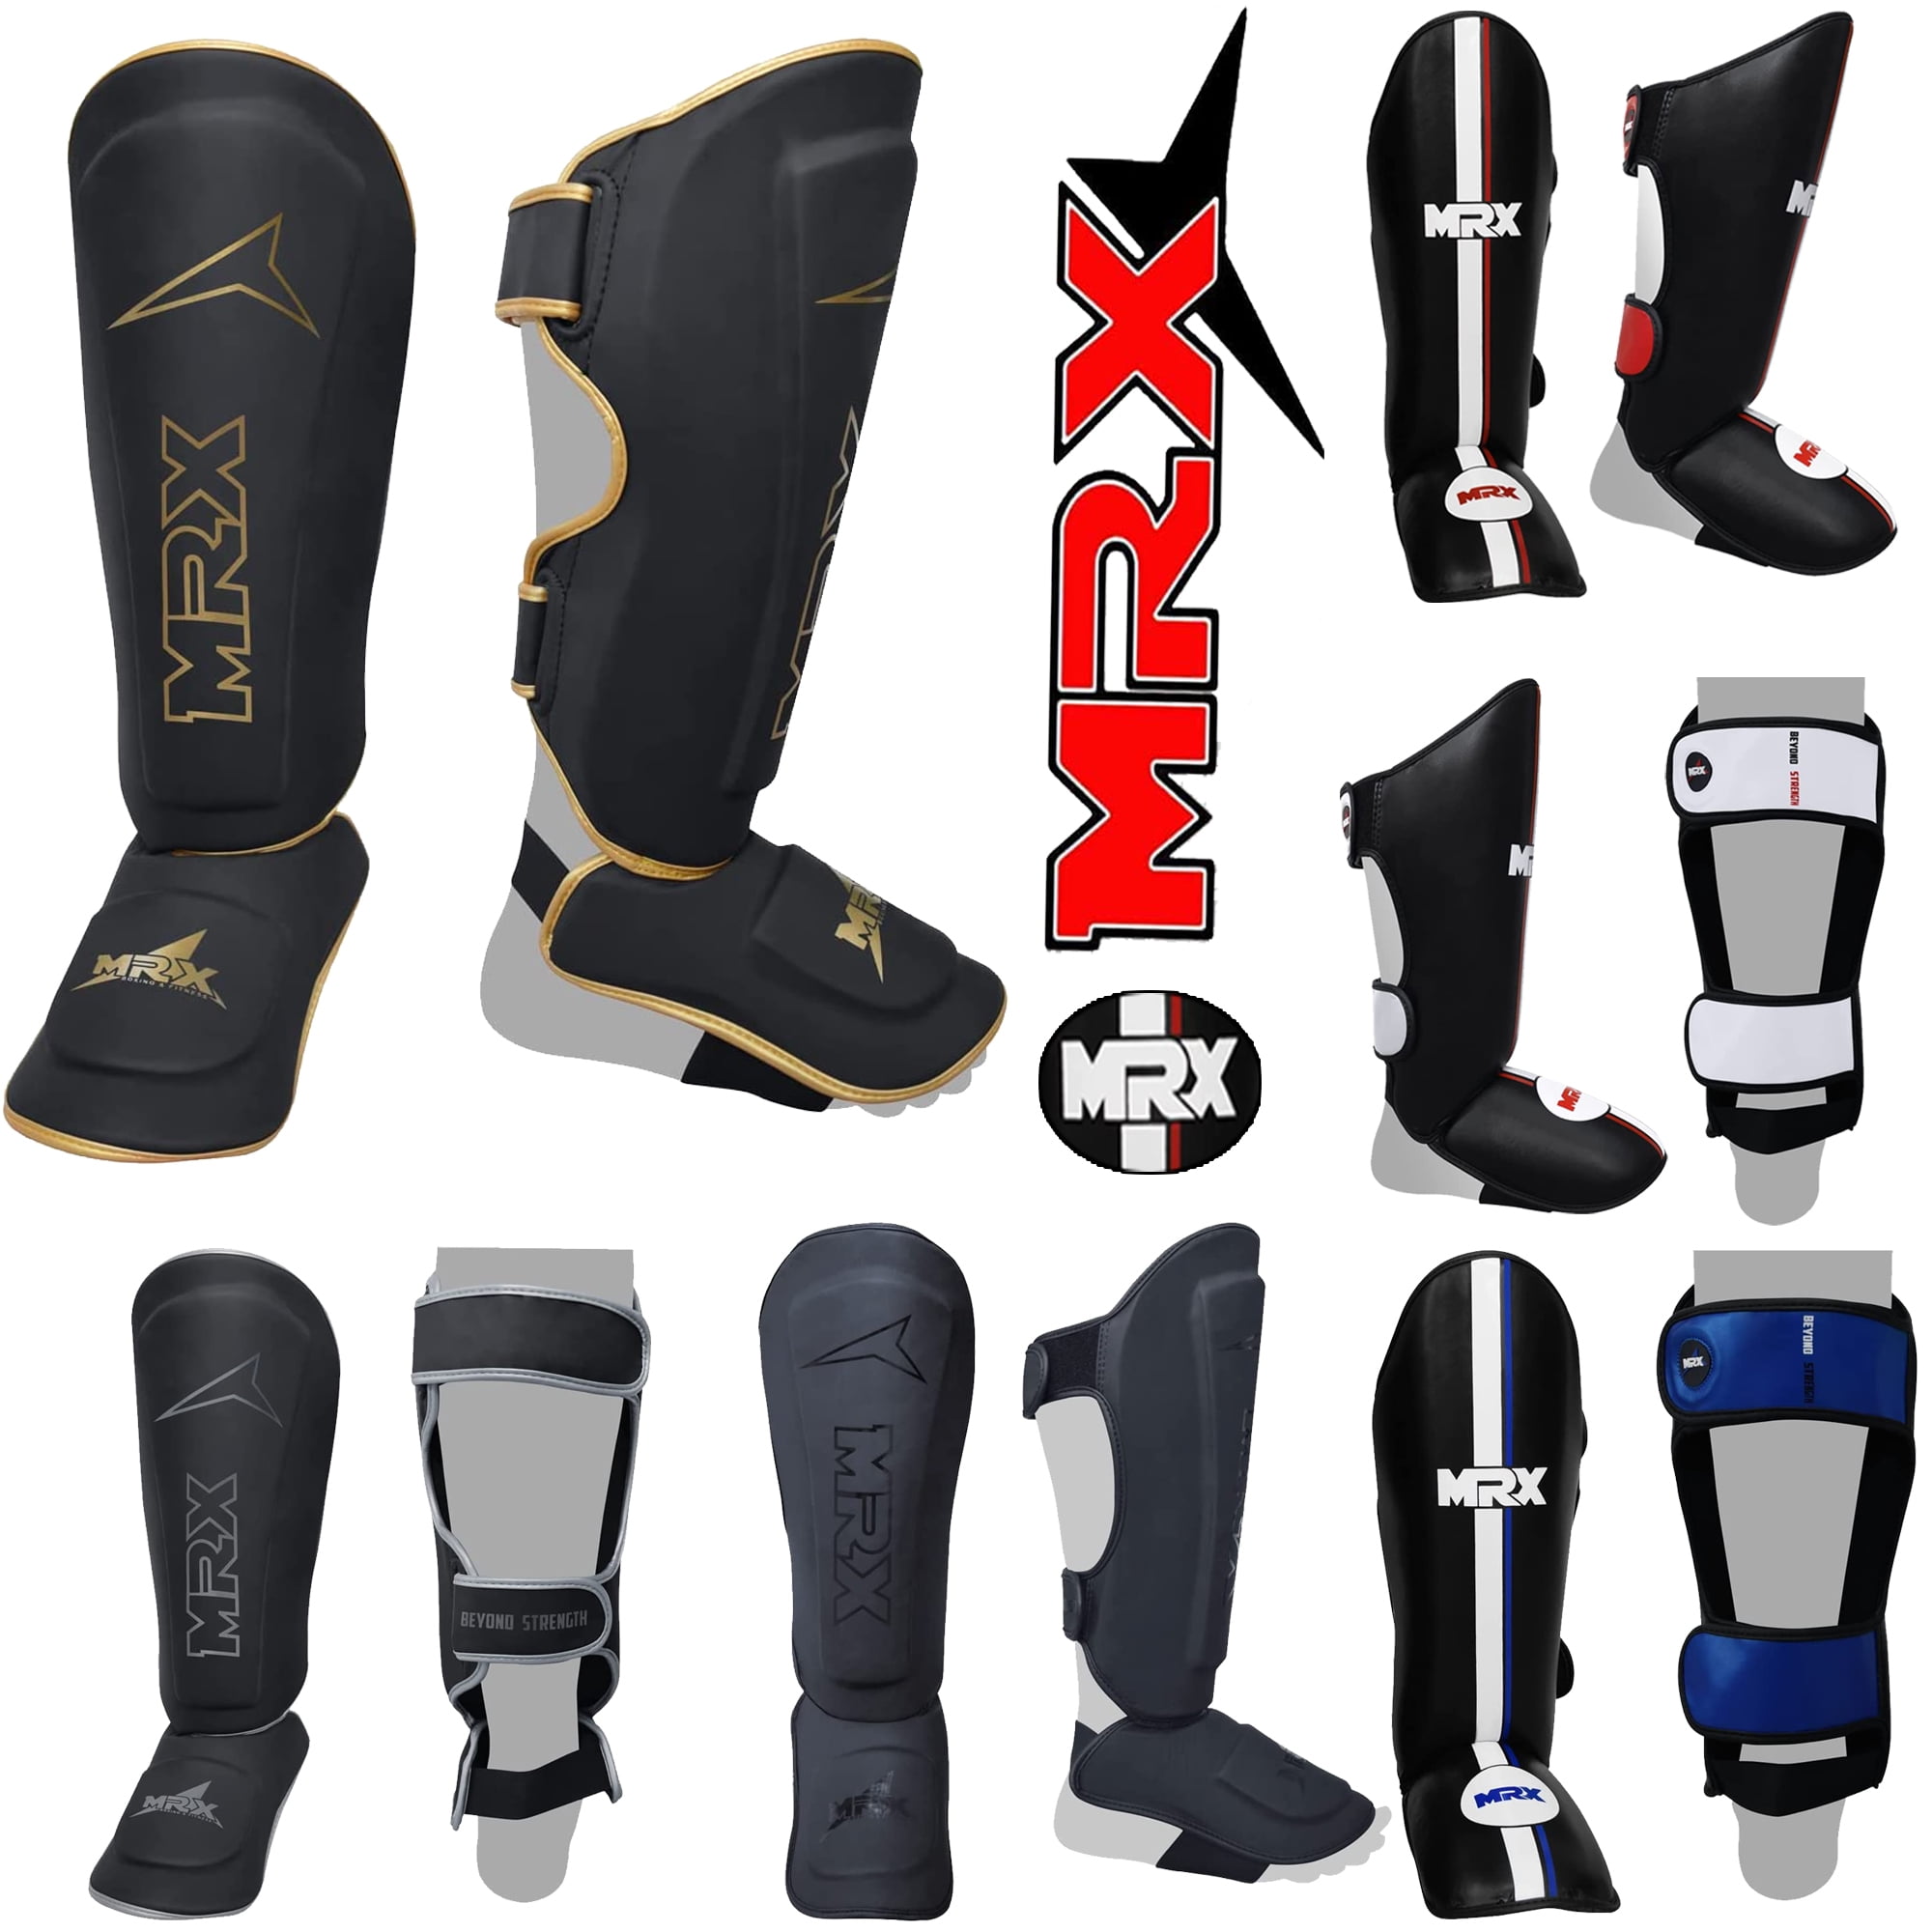 MRX BOXING & FITNESS Shin Guards & Shin Instep Pads for Boxing MMA Muay Thai Kickboxing Training Workout Extra Padding with Deluxe Embossed Design Protective Gear Men Women Shin & Foot Protector 